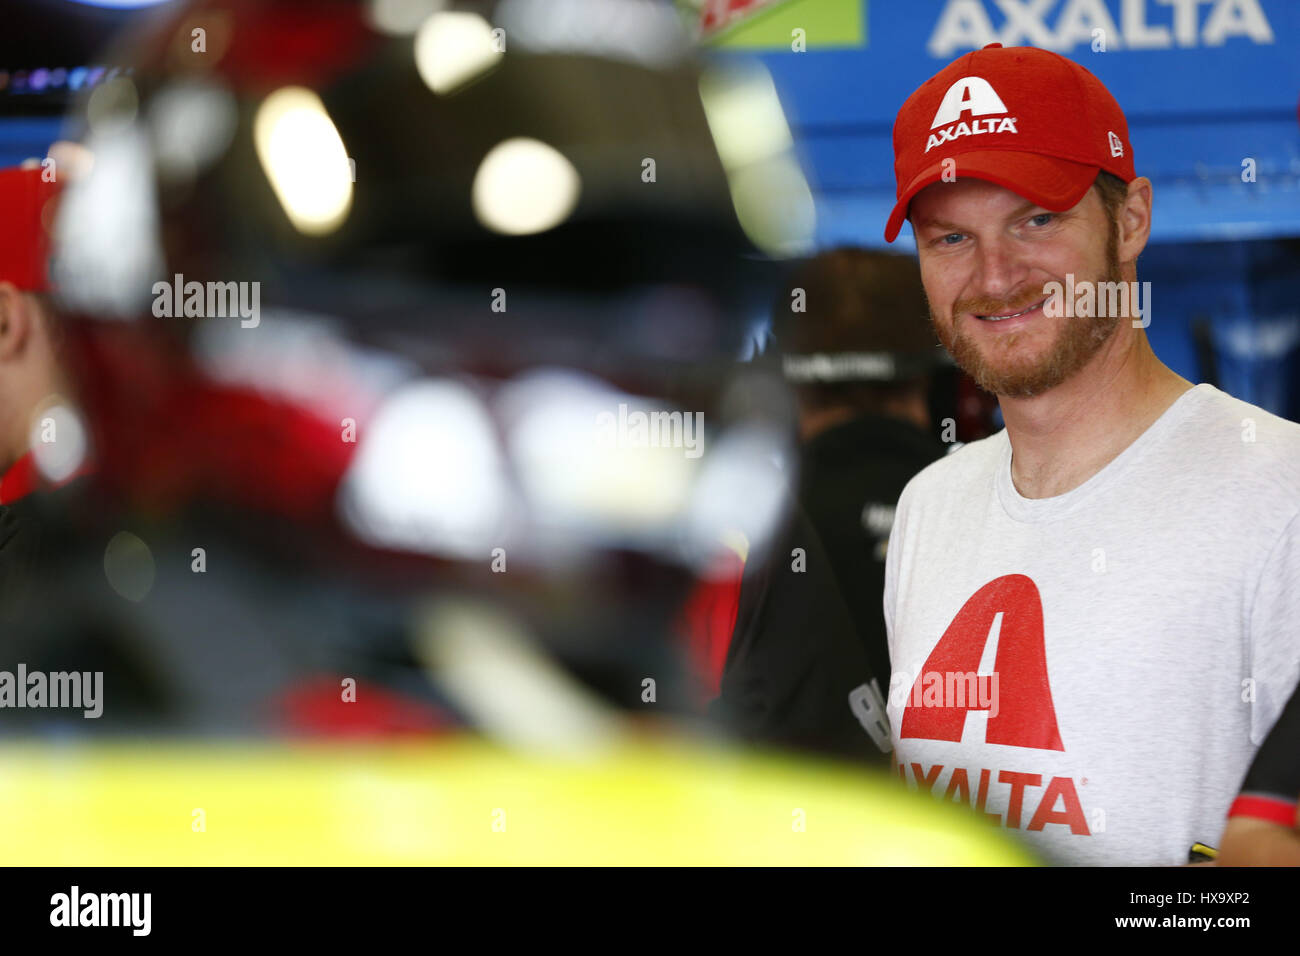 Fontana, California, USA. 25th Mar, 2017. March 25, 2017 - Fontana, California, USA: Dale Earnhardt Jr. (88) hangs out in the garage during practice for the Auto Club 400 at Auto Club Speedway in Fontana, California. Credit: Jusitn R. Noe Asp Inc/ASP/ZUMA Wire/Alamy Live News Stock Photo